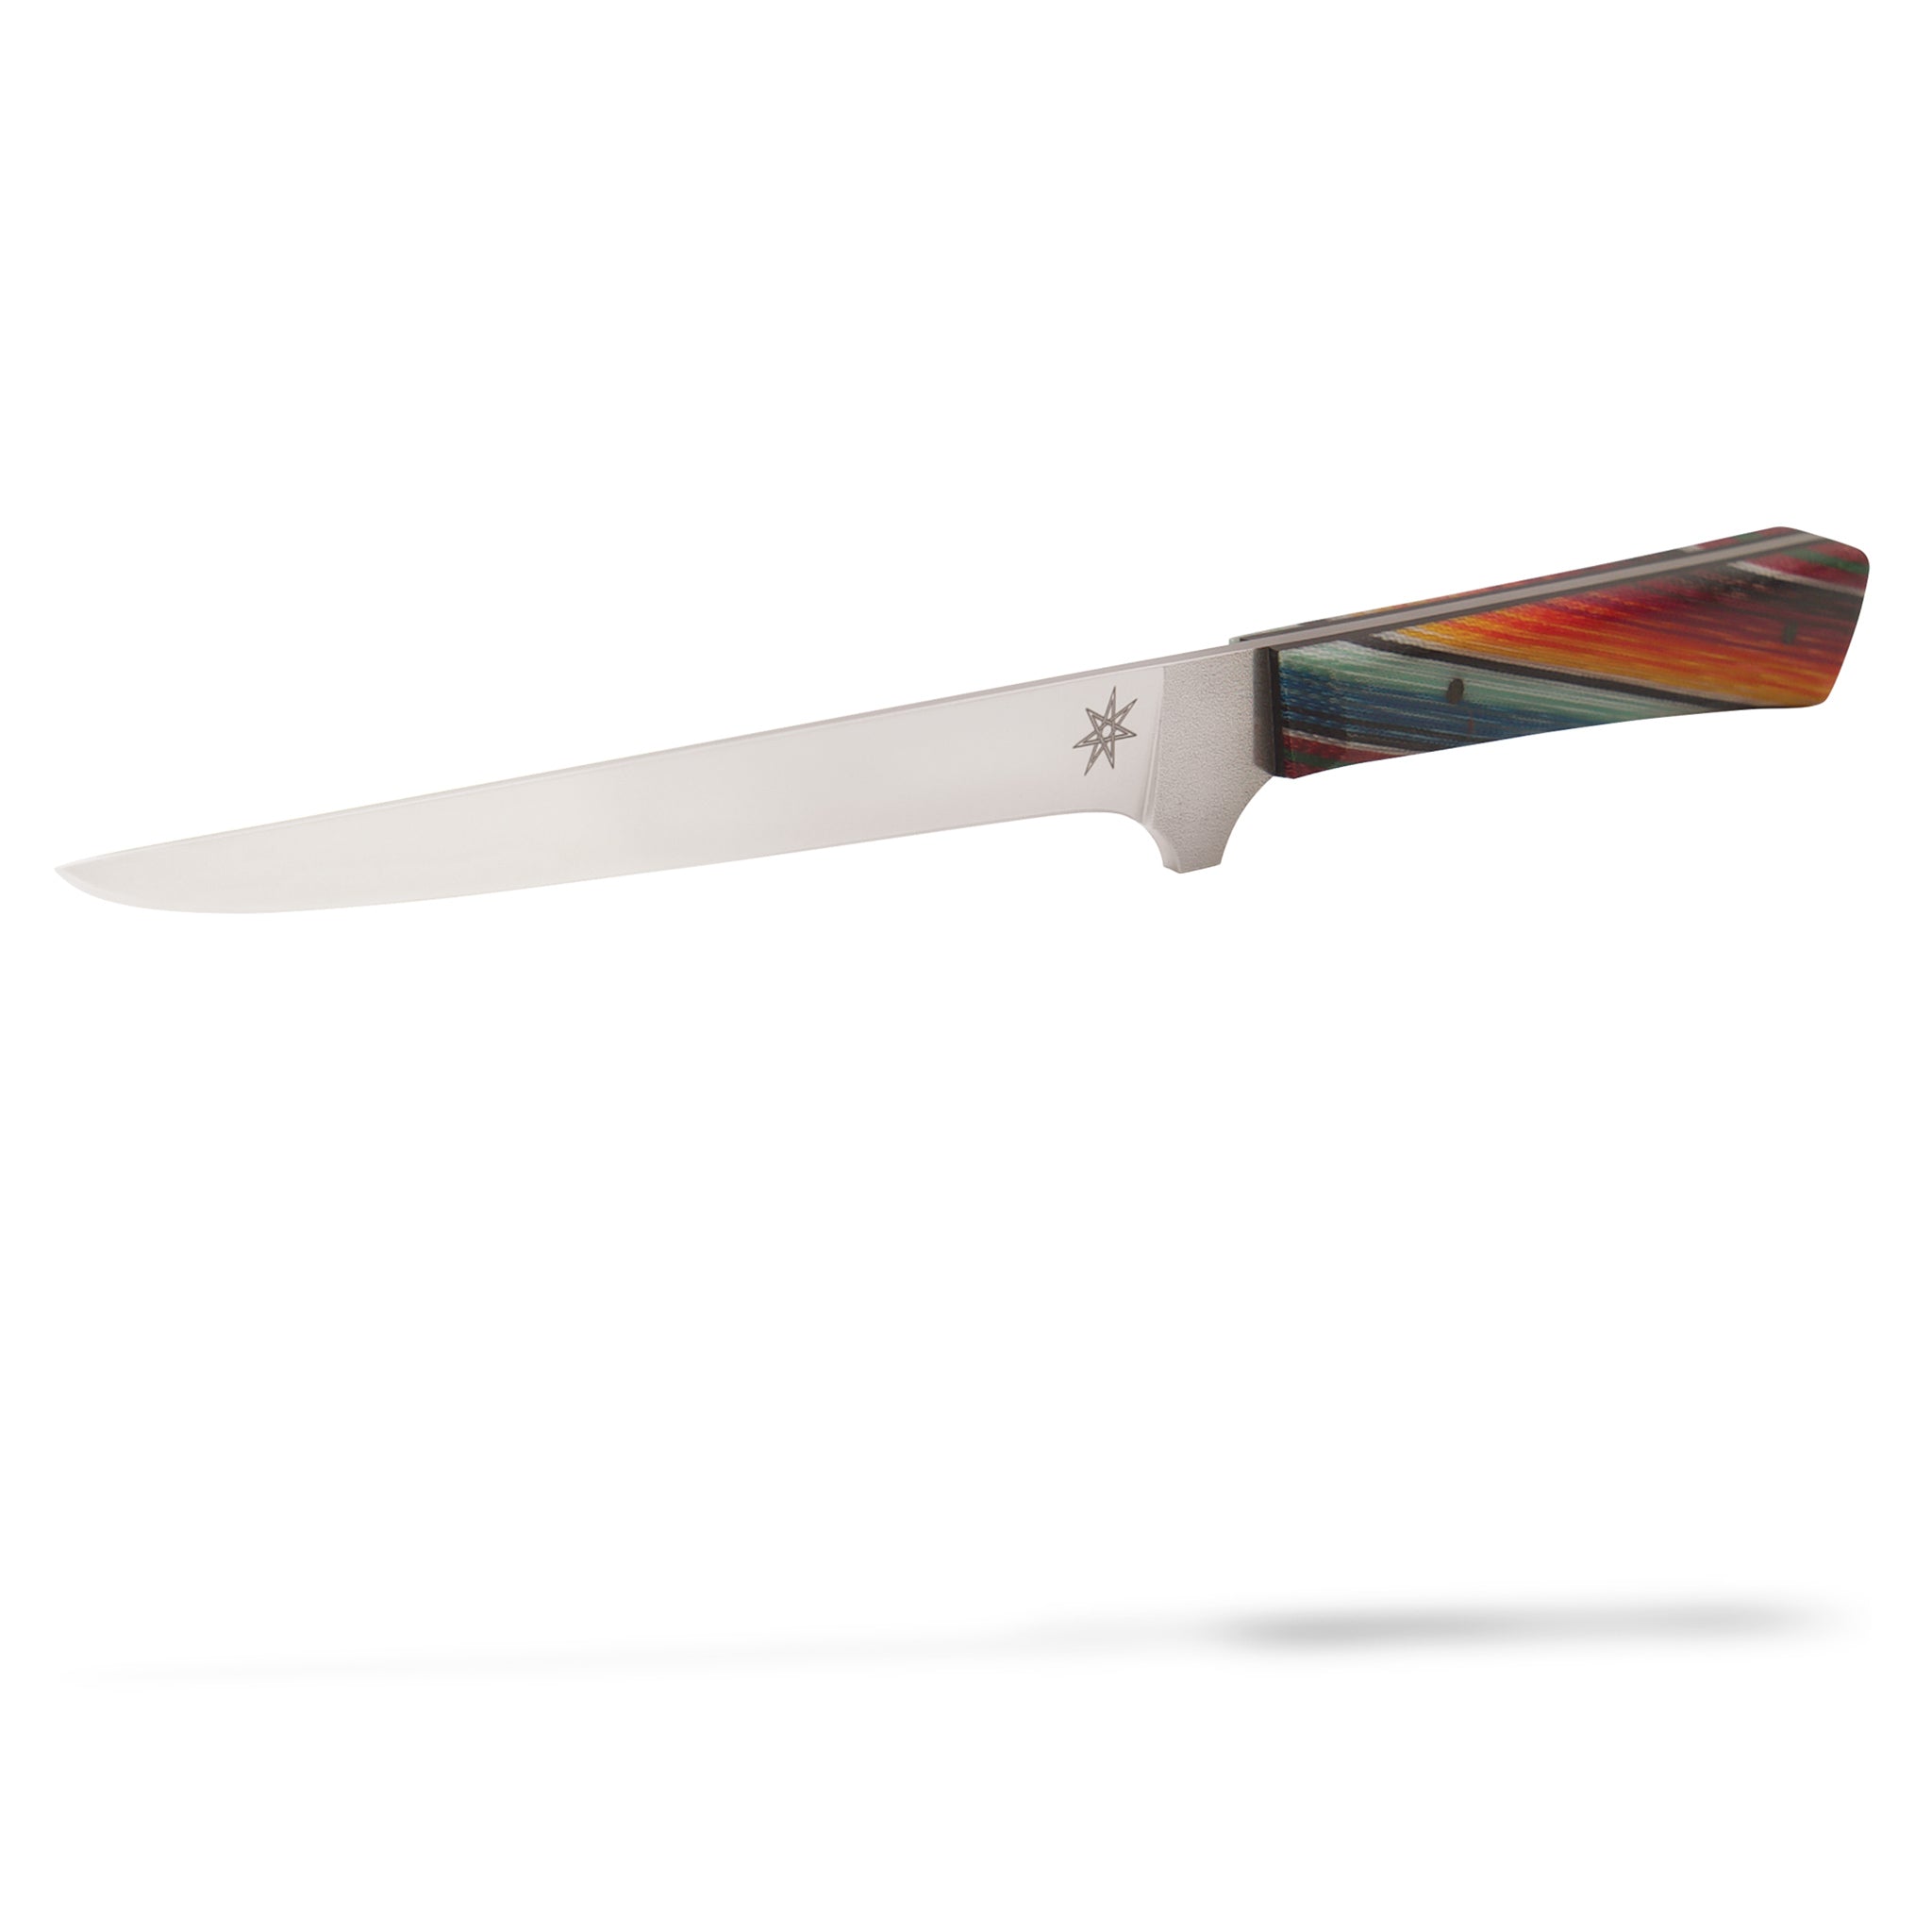 6" Baja Straight stainless steel Boning Knife by Town Cutler. Handmade kitchen knife with vibrant and lux Mexican blanket pattern handle. Made in America.